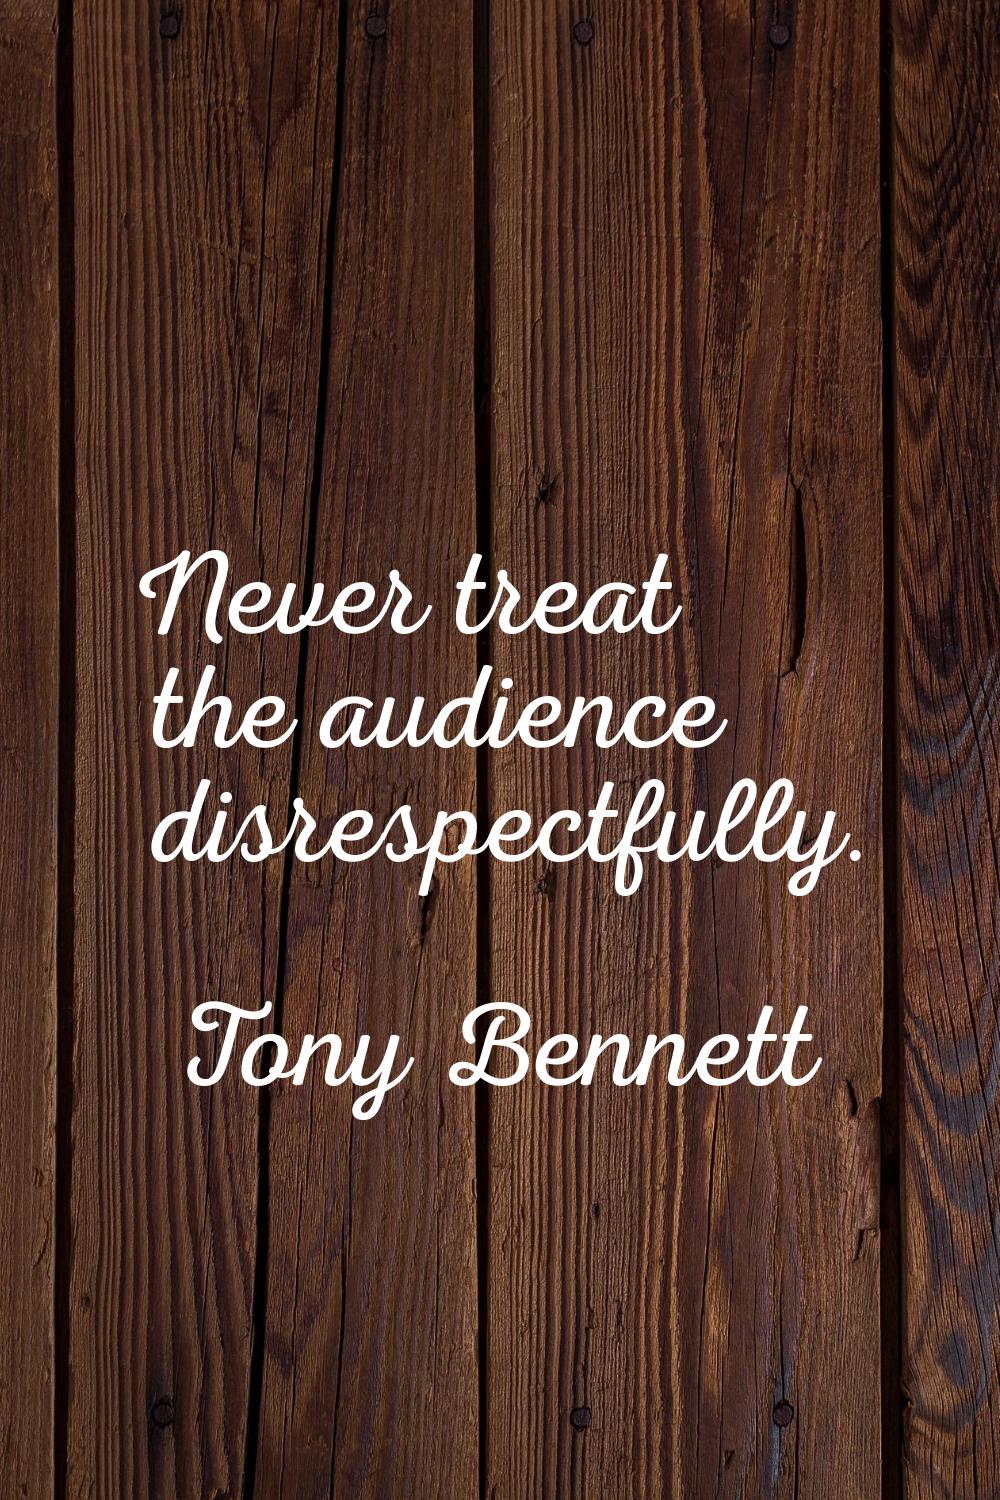 Never treat the audience disrespectfully.